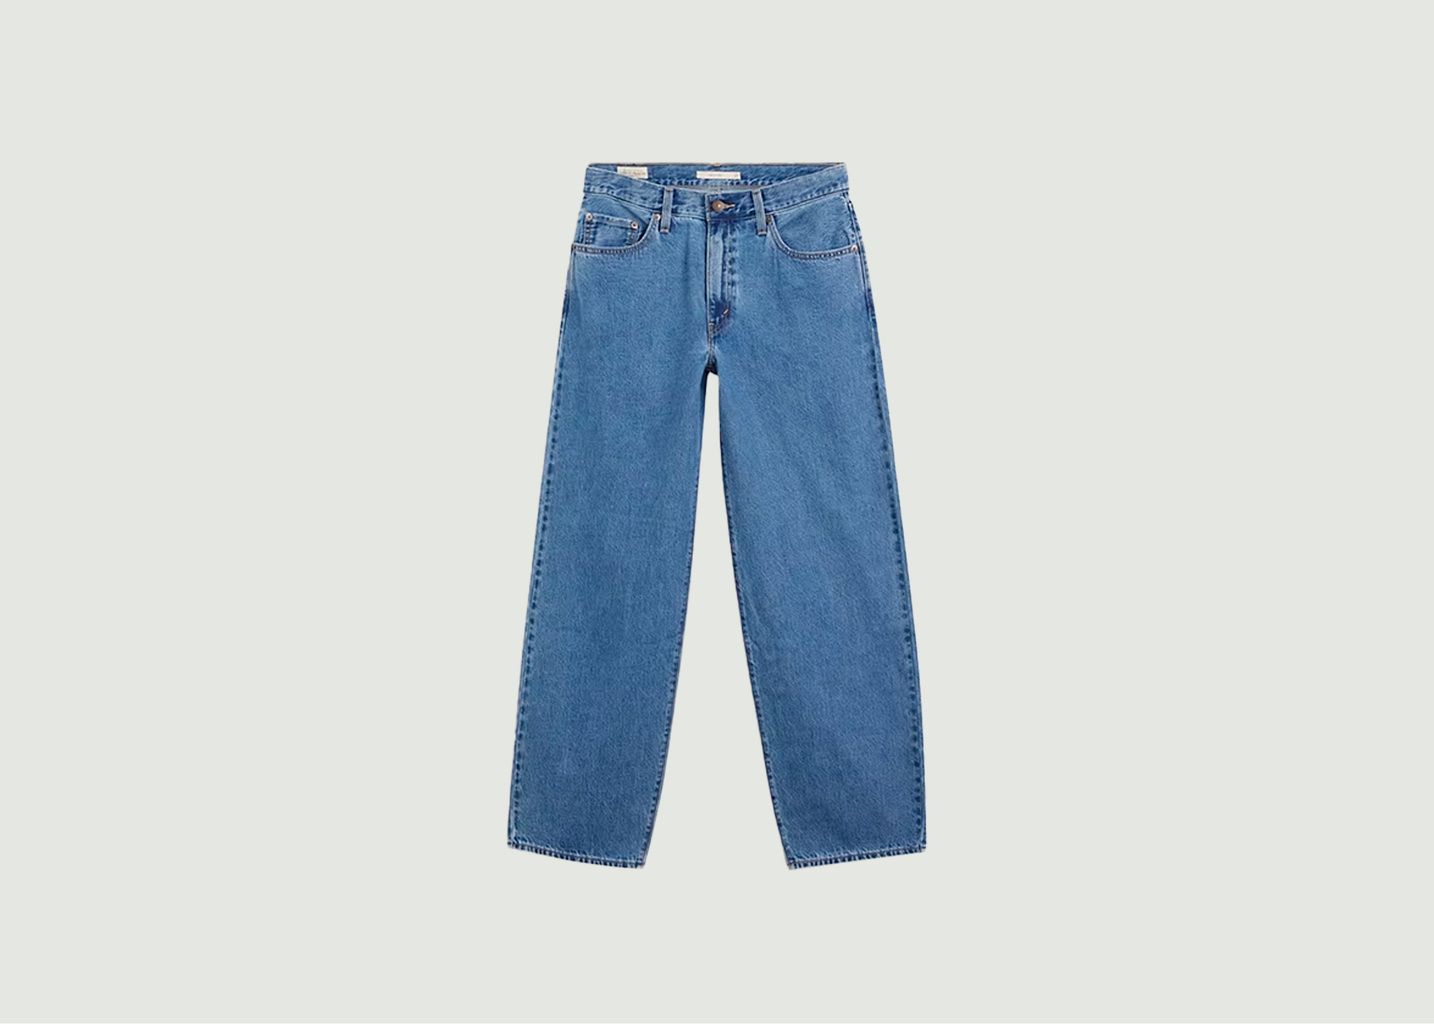 Dad Baggy Jeans - Levi's Red Tab